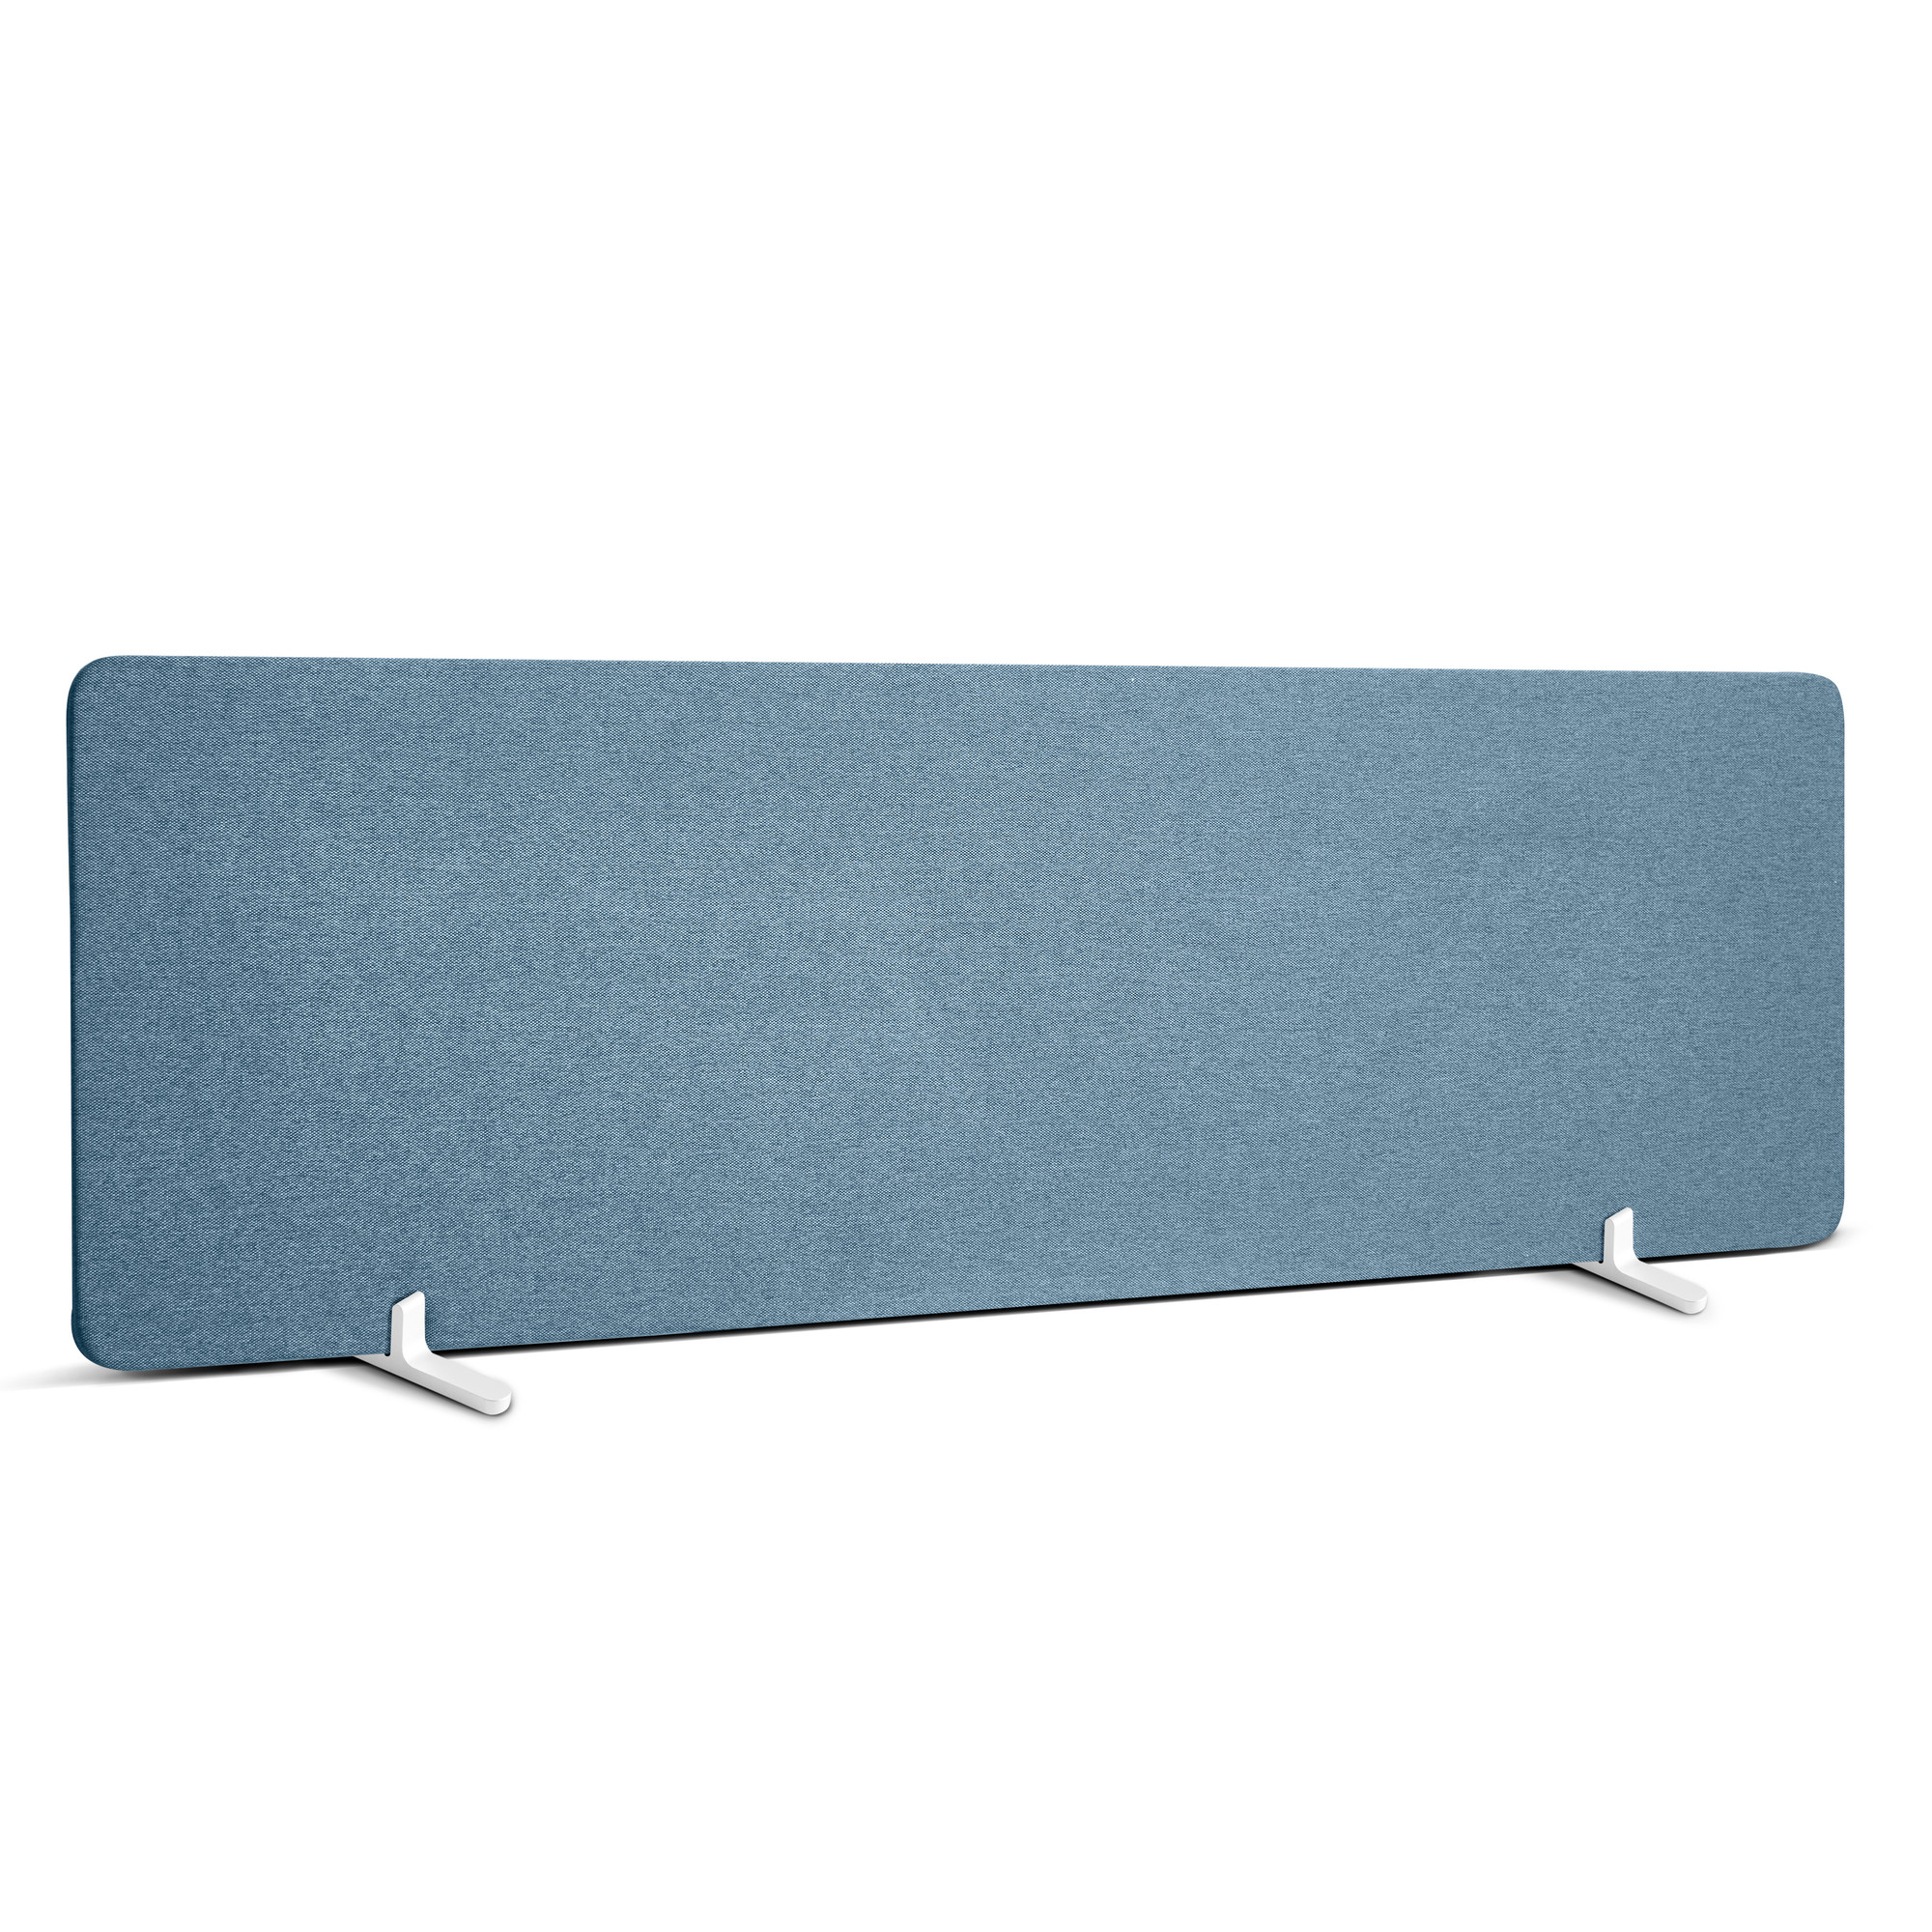 Pinnable Fabric Privacy Panel, Footed